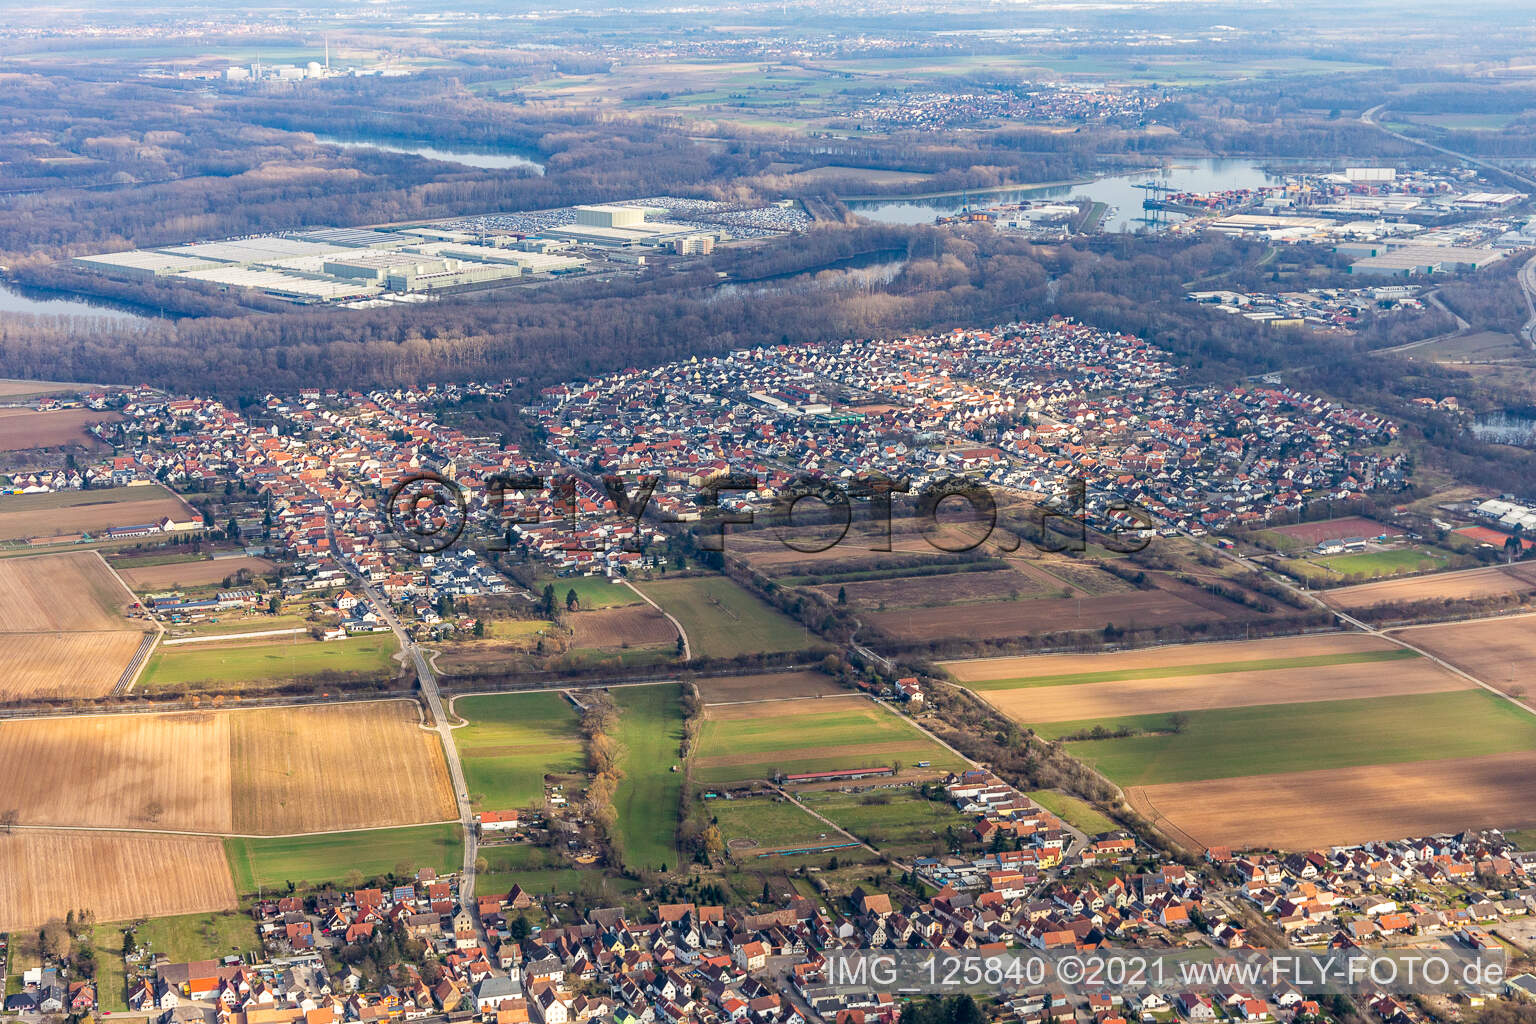 Drone image of Lingenfeld in the state Rhineland-Palatinate, Germany